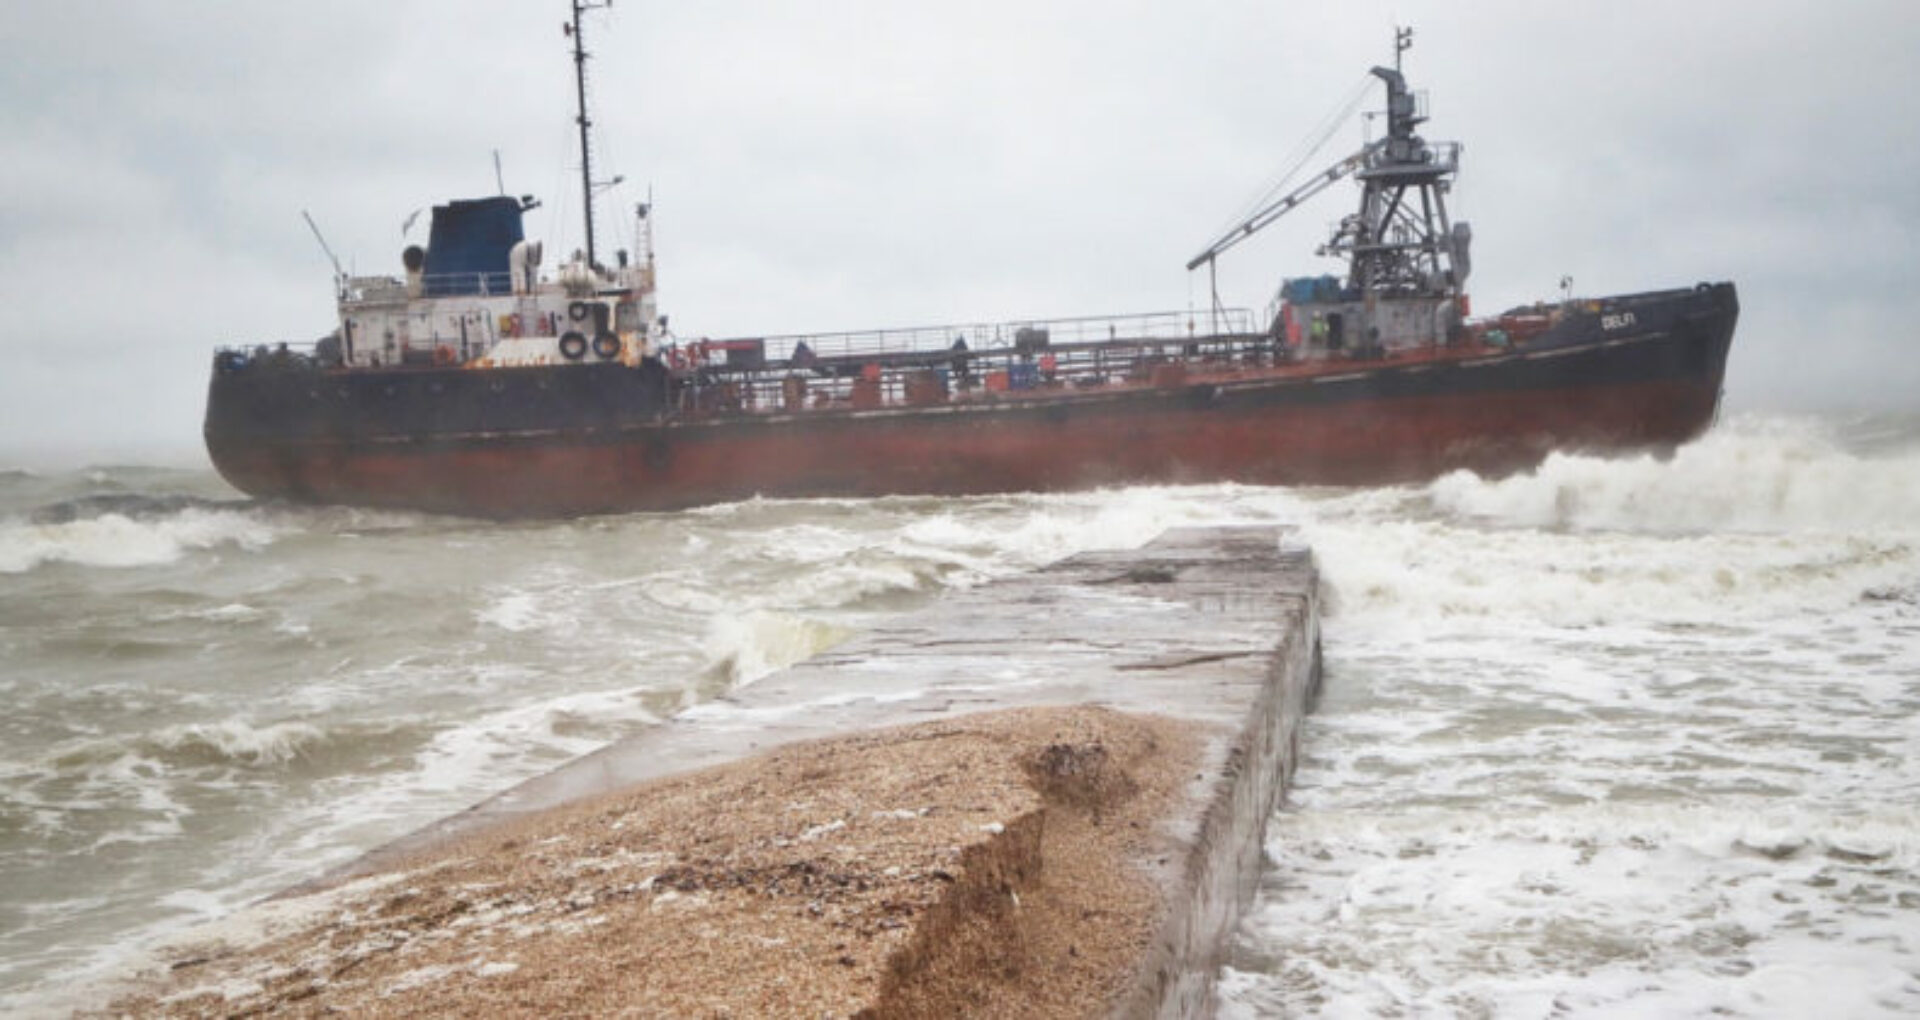 PHOTO/VIDEO A Tanker Under Moldova’s Flag Ran Aground Increasing the Pollution Level Near Odessa